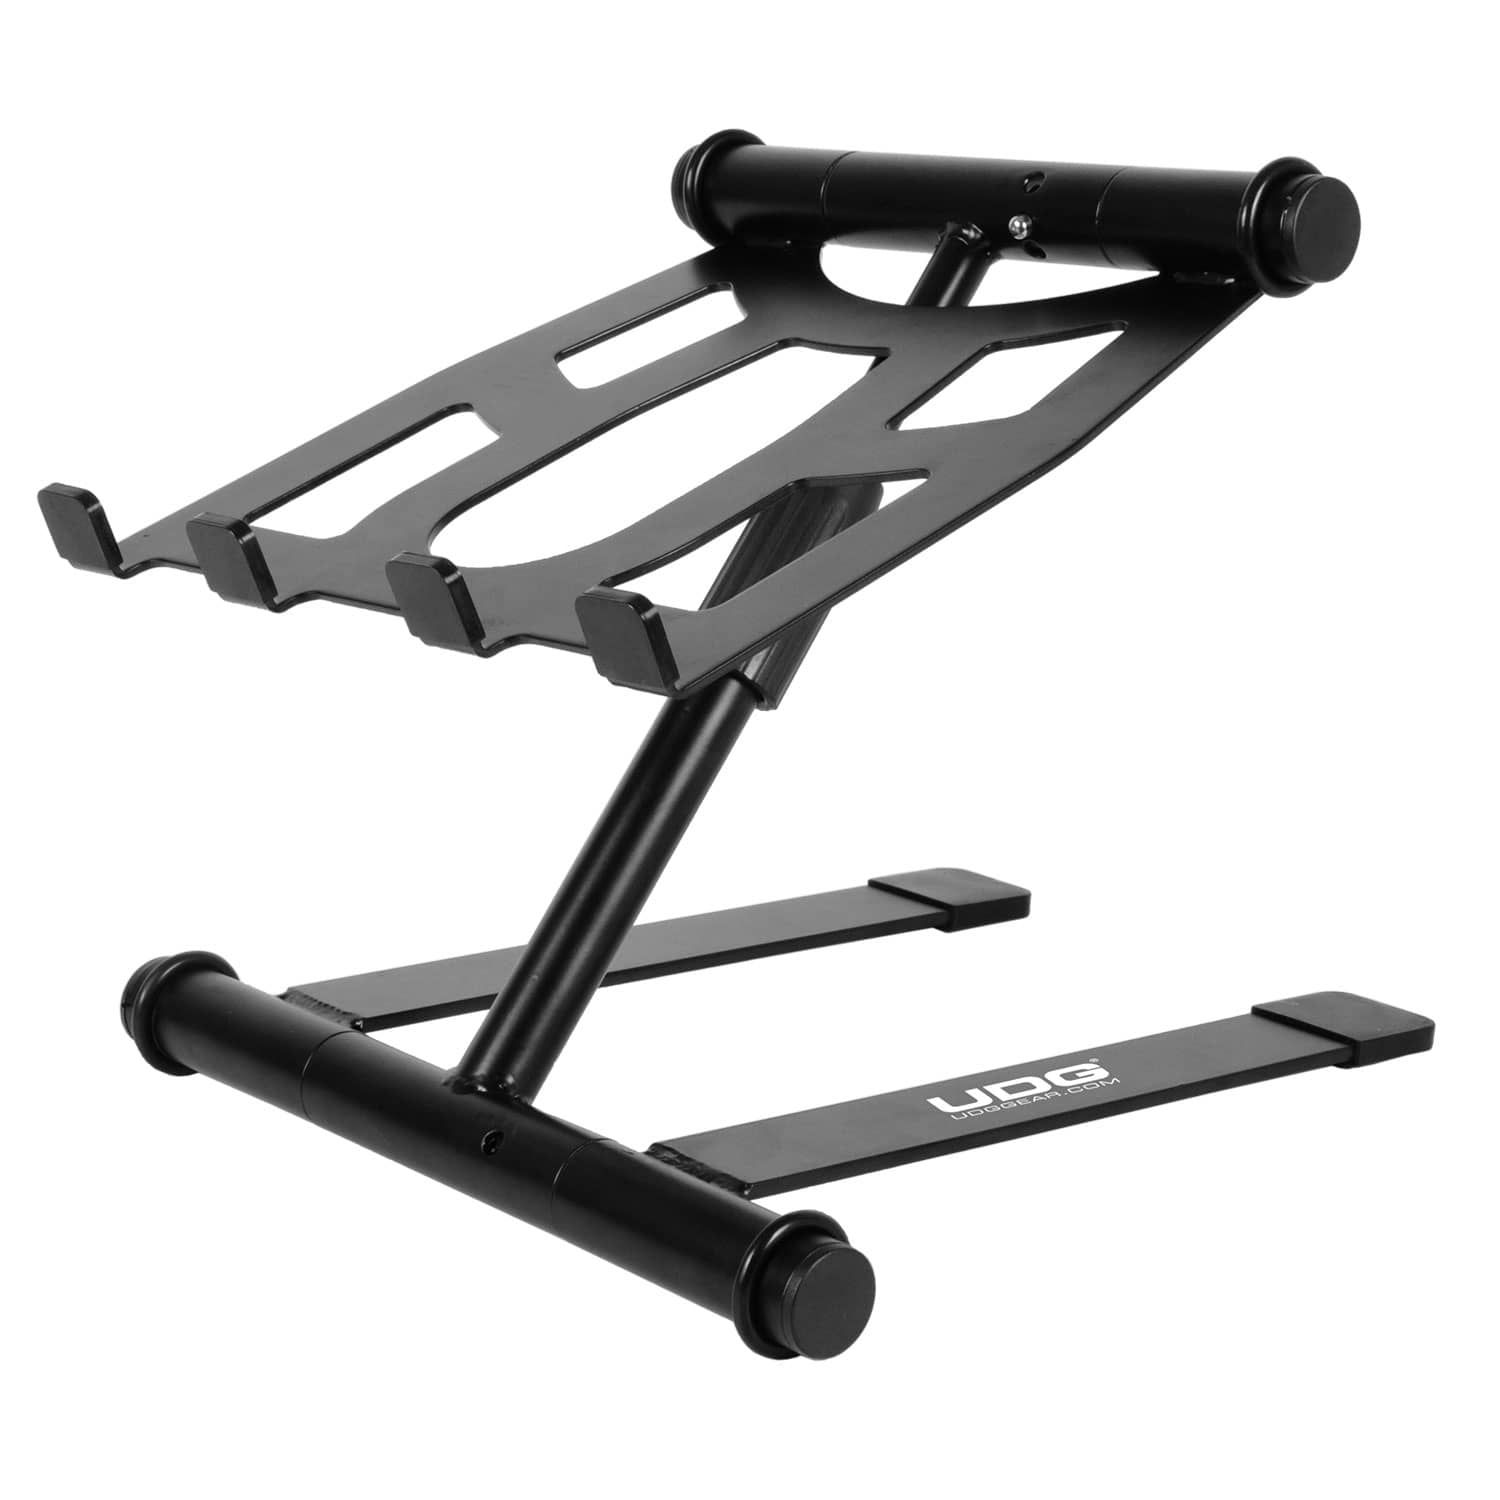 UDG Ultimate Height Adjustable Laptop Stand, Black at Gear4music